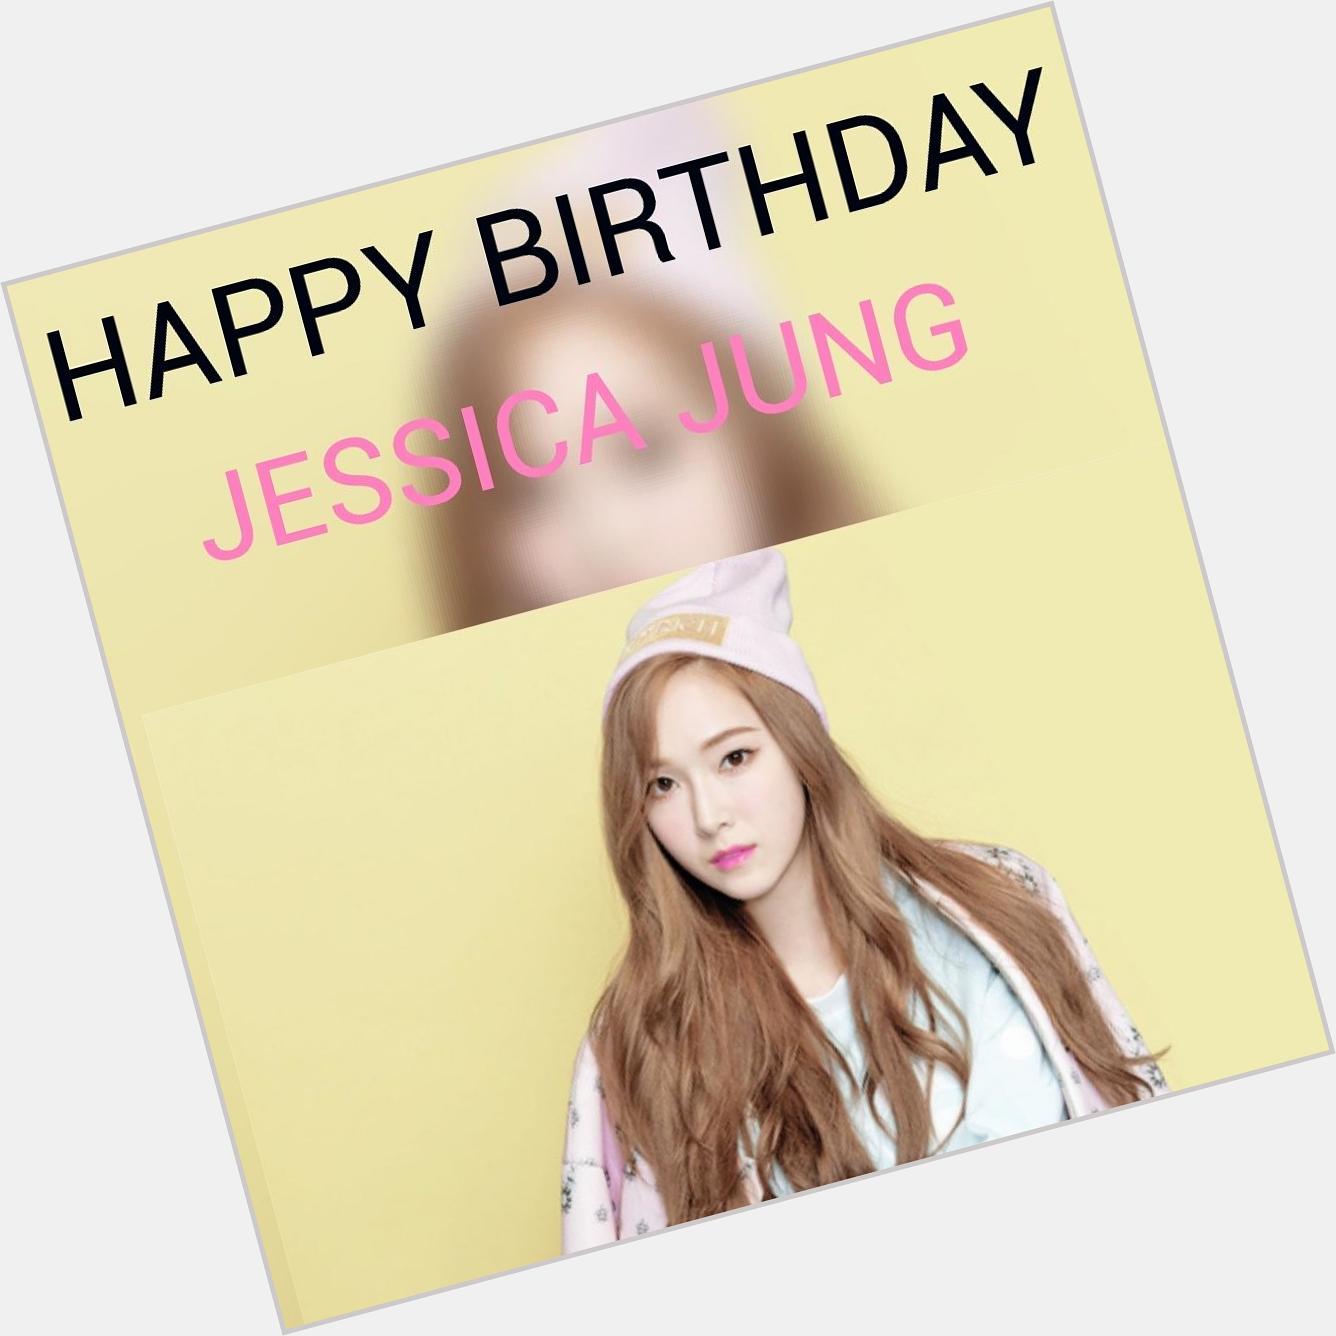 To the great Jessica Jung, HAPPY BIRTHDAY! Iloveyou so much.    